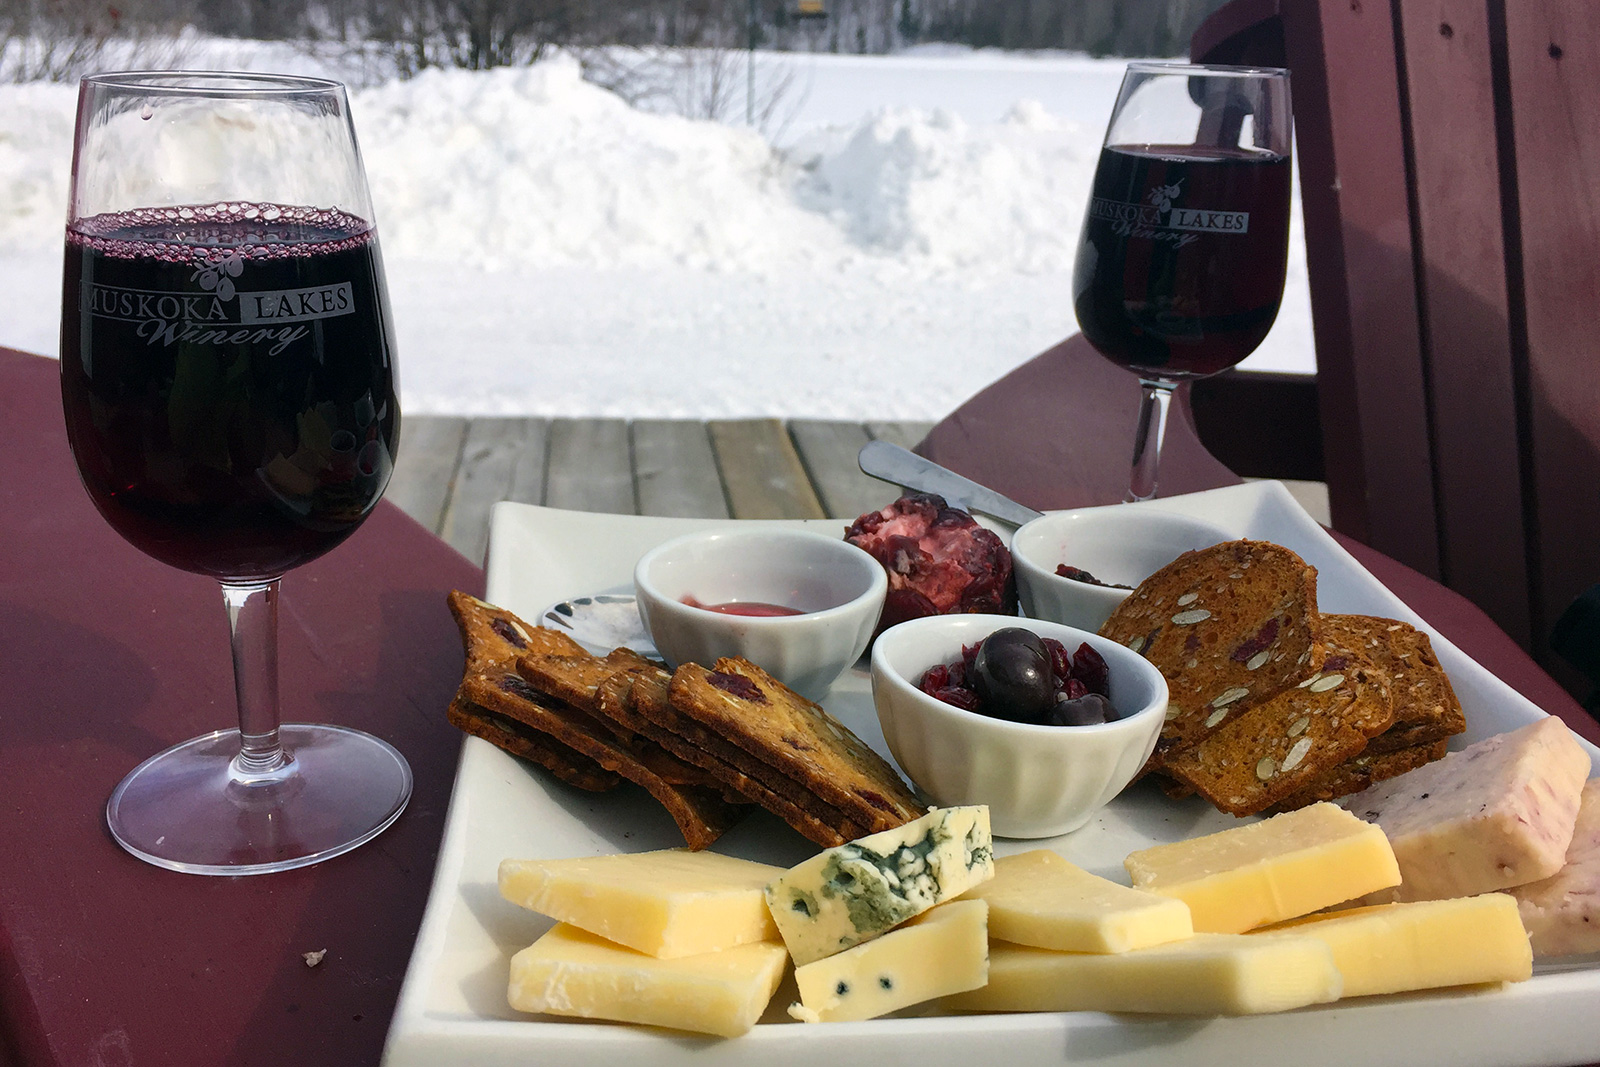 cheese plate with two glasses of muskoka lakes wine on the arm of Muskoka chairs against a snowy background